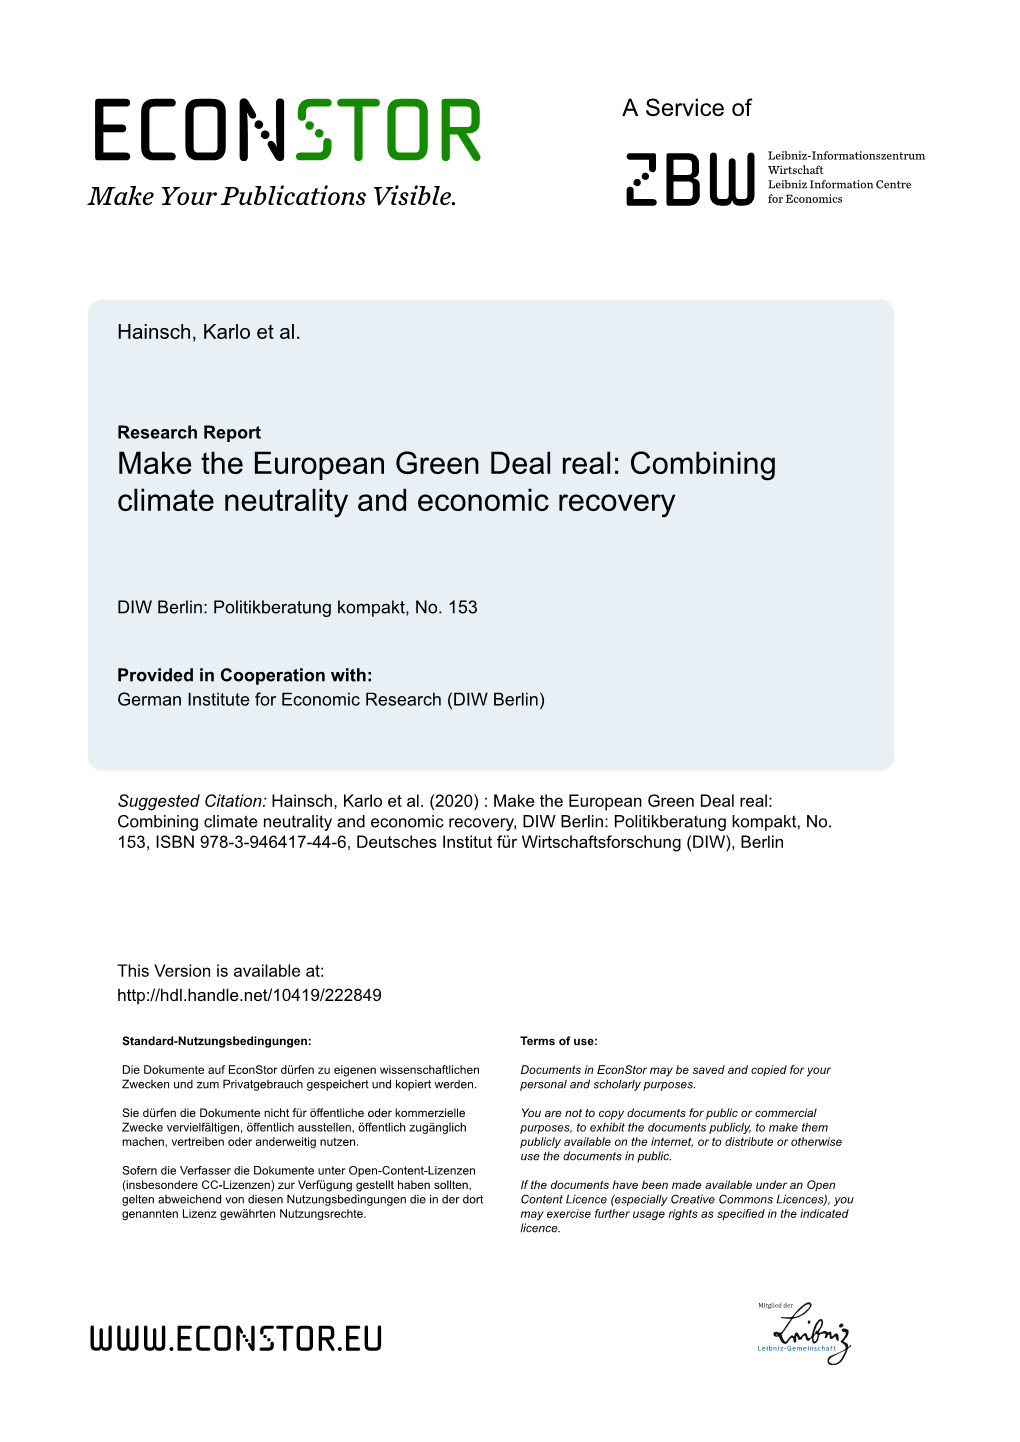 Make the European Green Deal Real: Combining Climate Neutrality and Economic Recovery